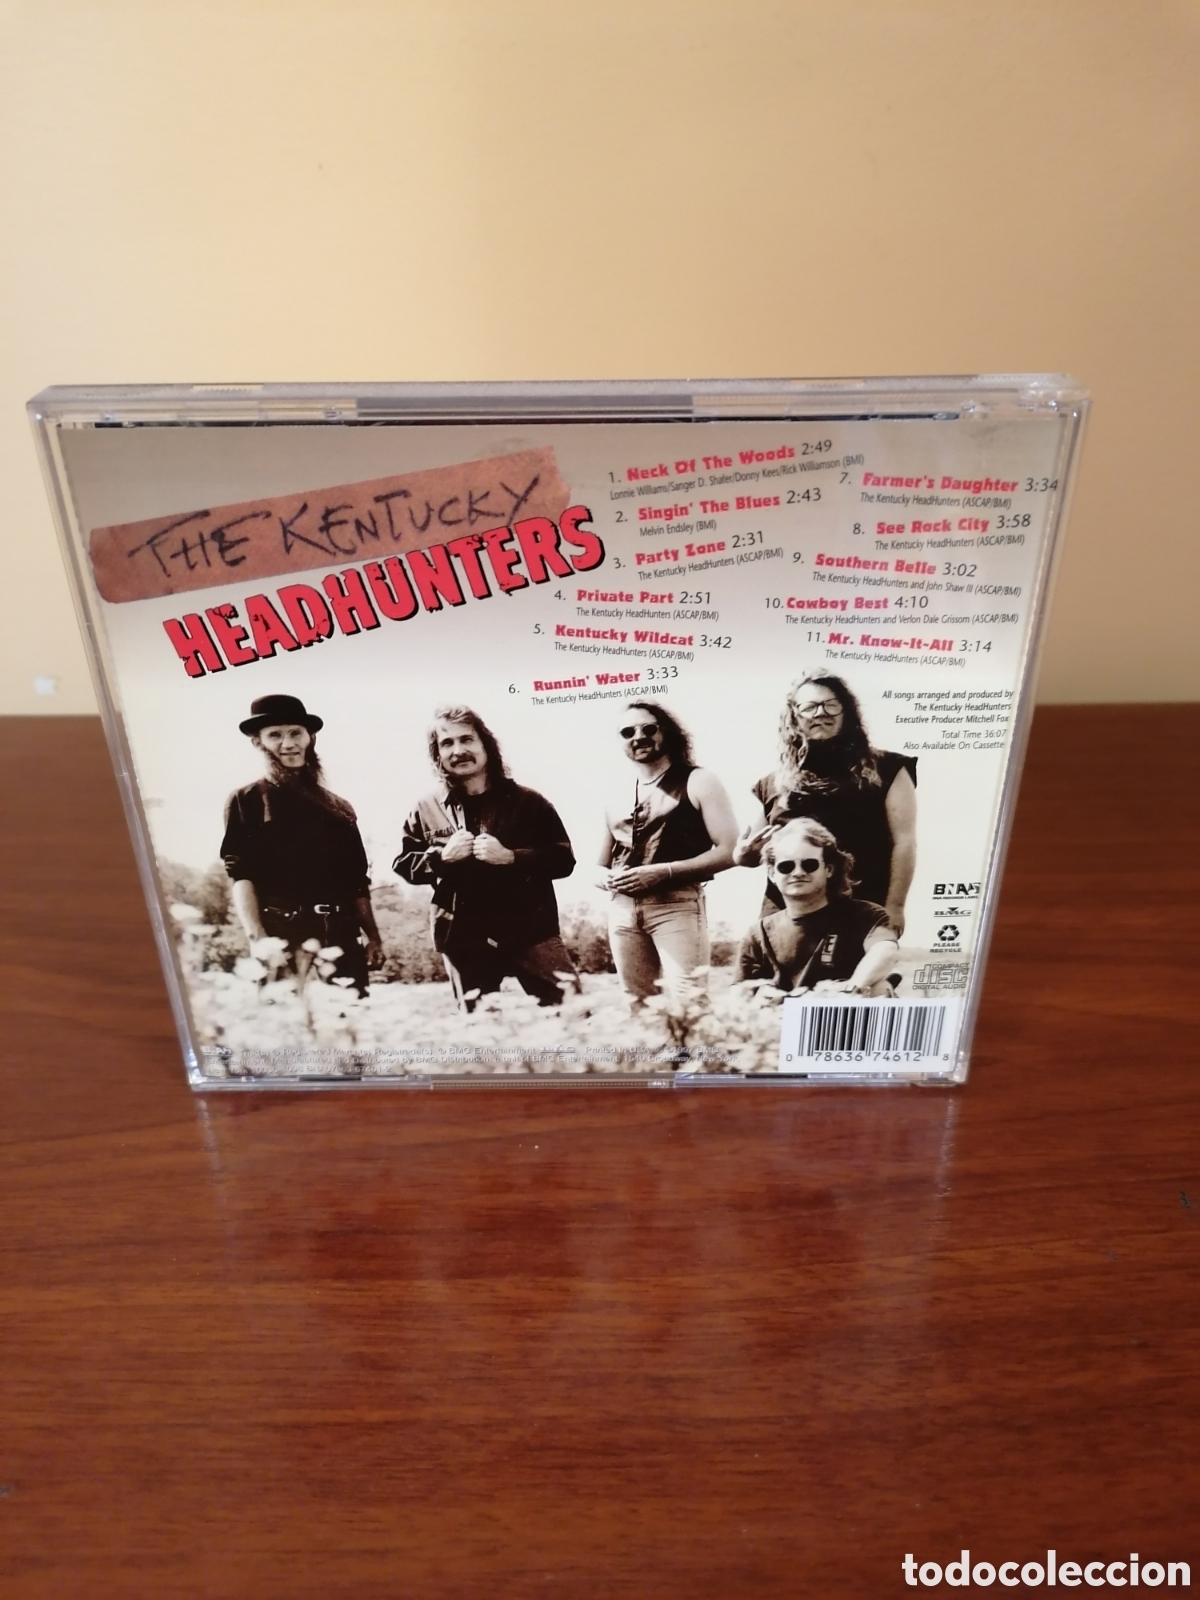 the kentucky headhunters. stompin' grounds.1997 - Buy Cd's of Rock